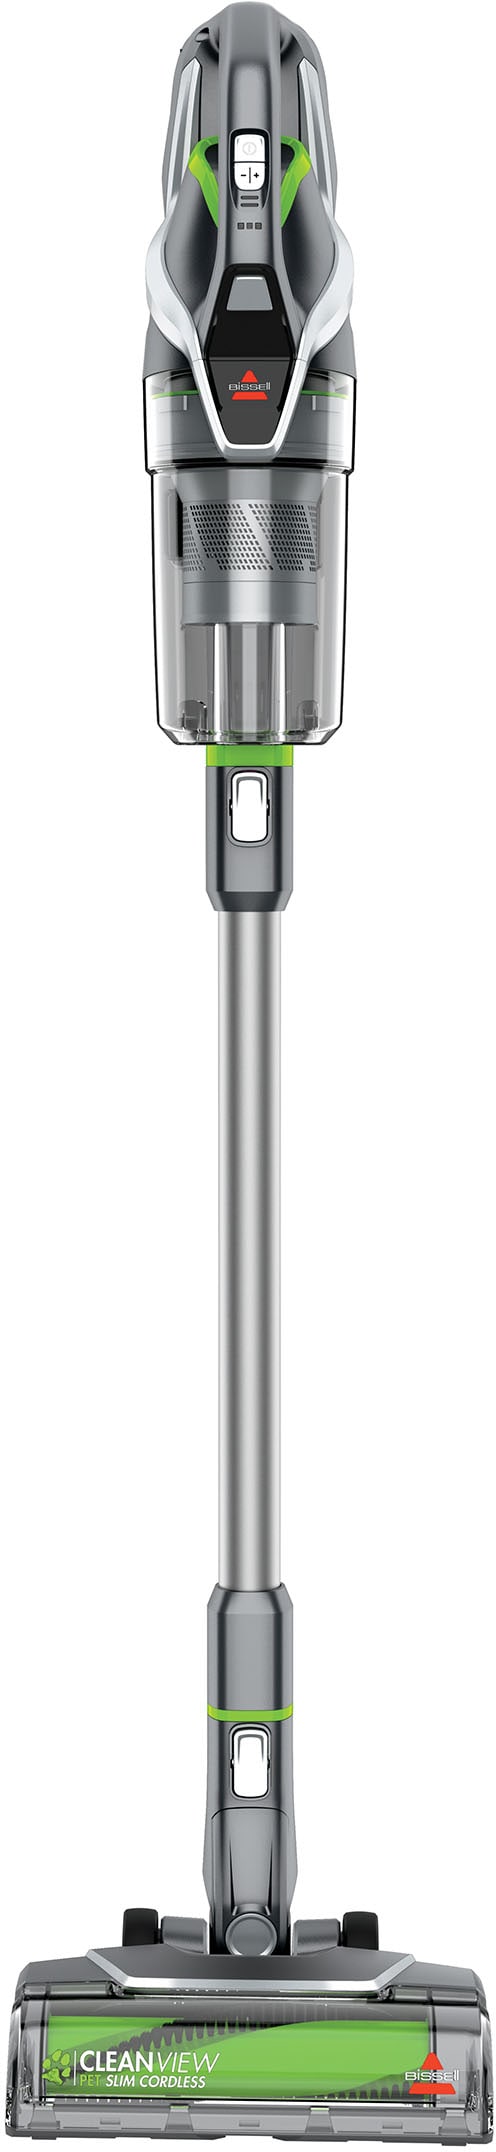 BISSELL - CleanView Pet Slim Cordless Stick Vacuum - Silver/Titanium with ChaCha Live Accents_0